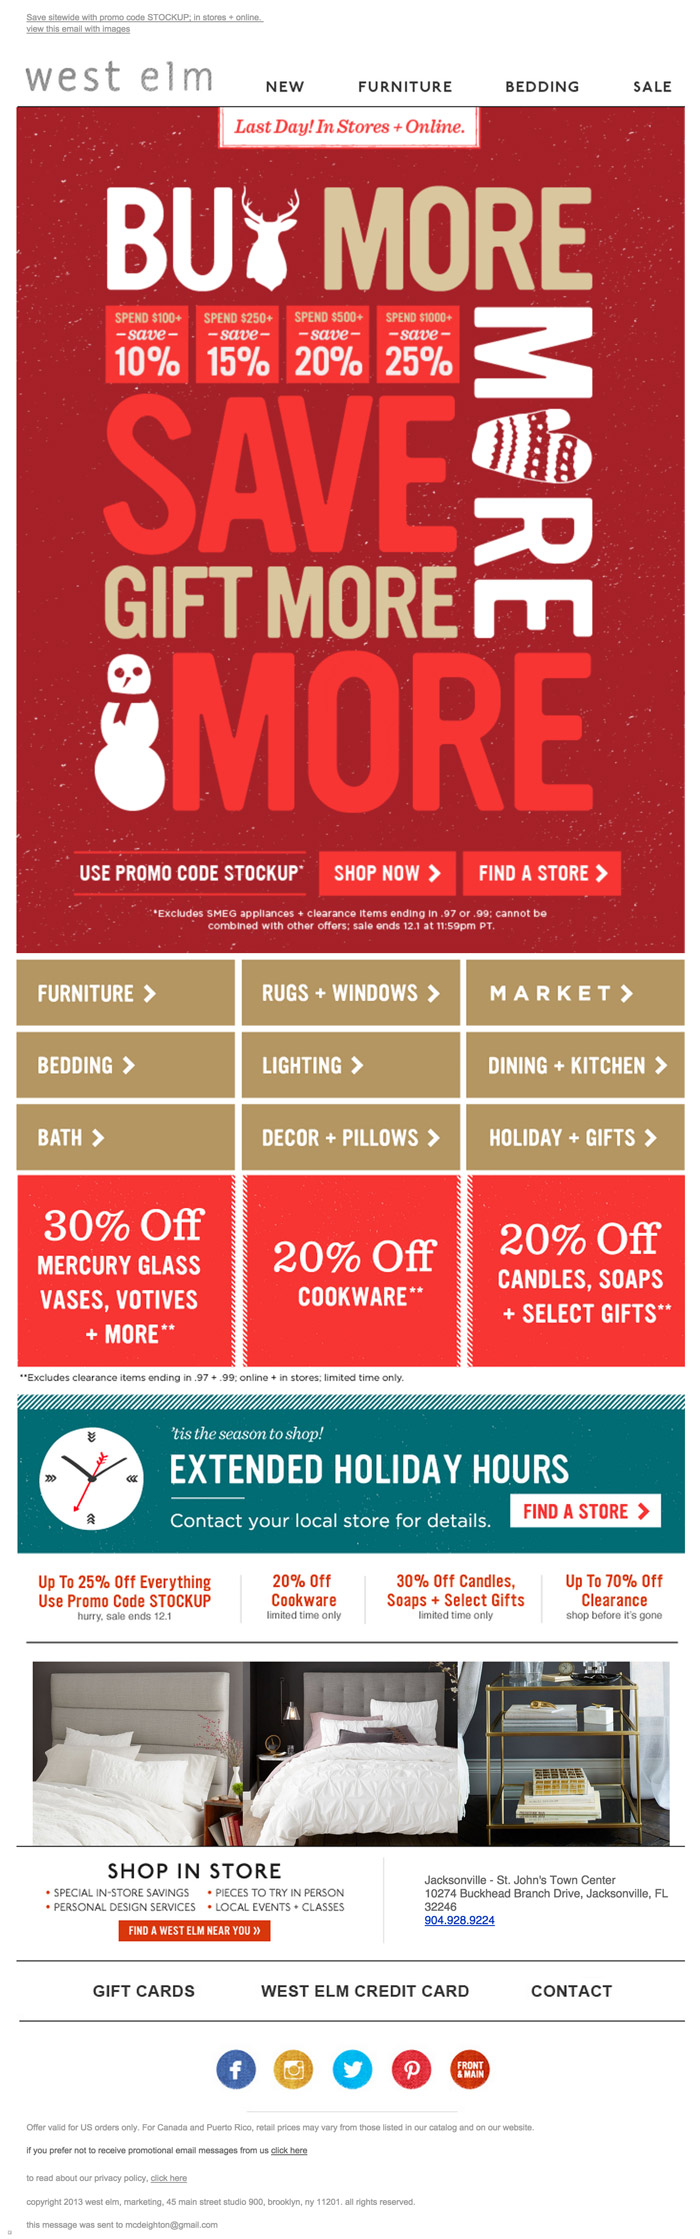 West Elm eCommerce email